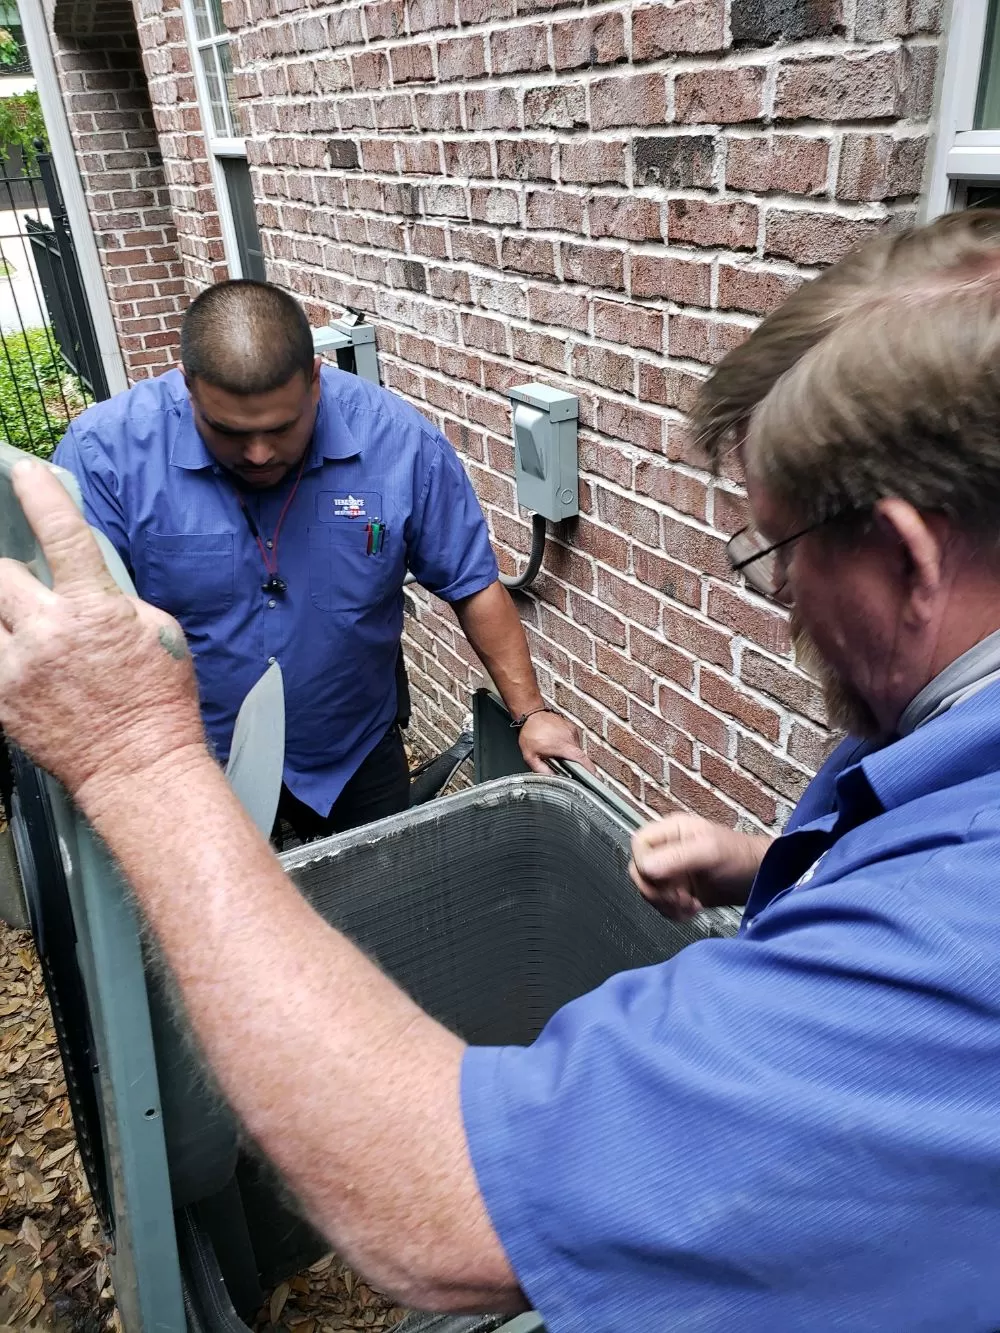 Two Texas Ace Heating & Air technicians working on a HVAC system